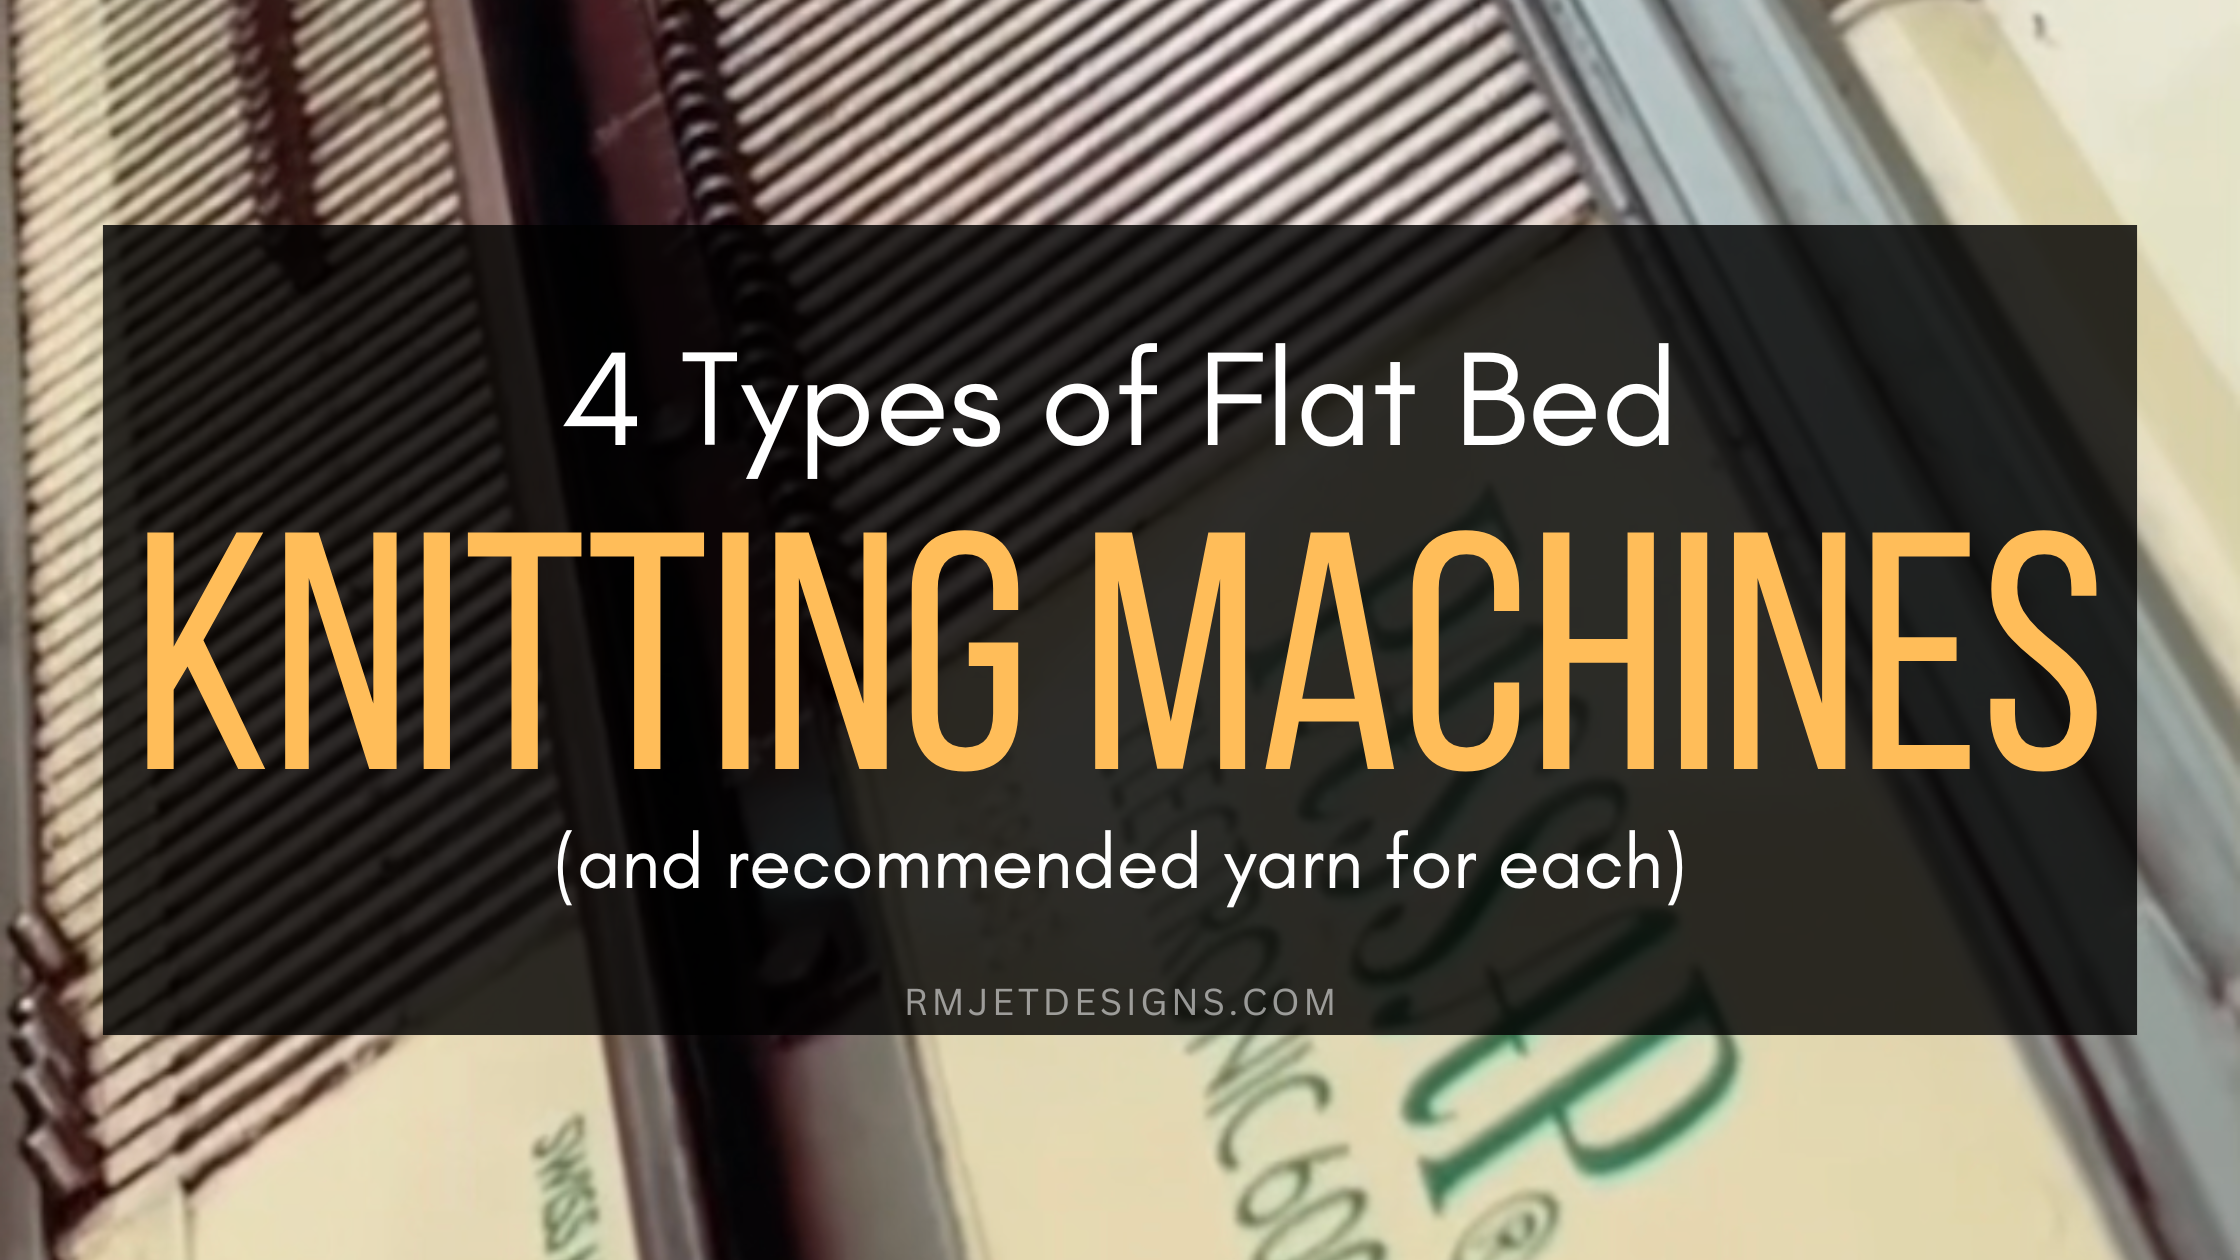 4 Types of Flat Bed Knitting Machines and Recommended Yarn For Each By RMJETdesigns